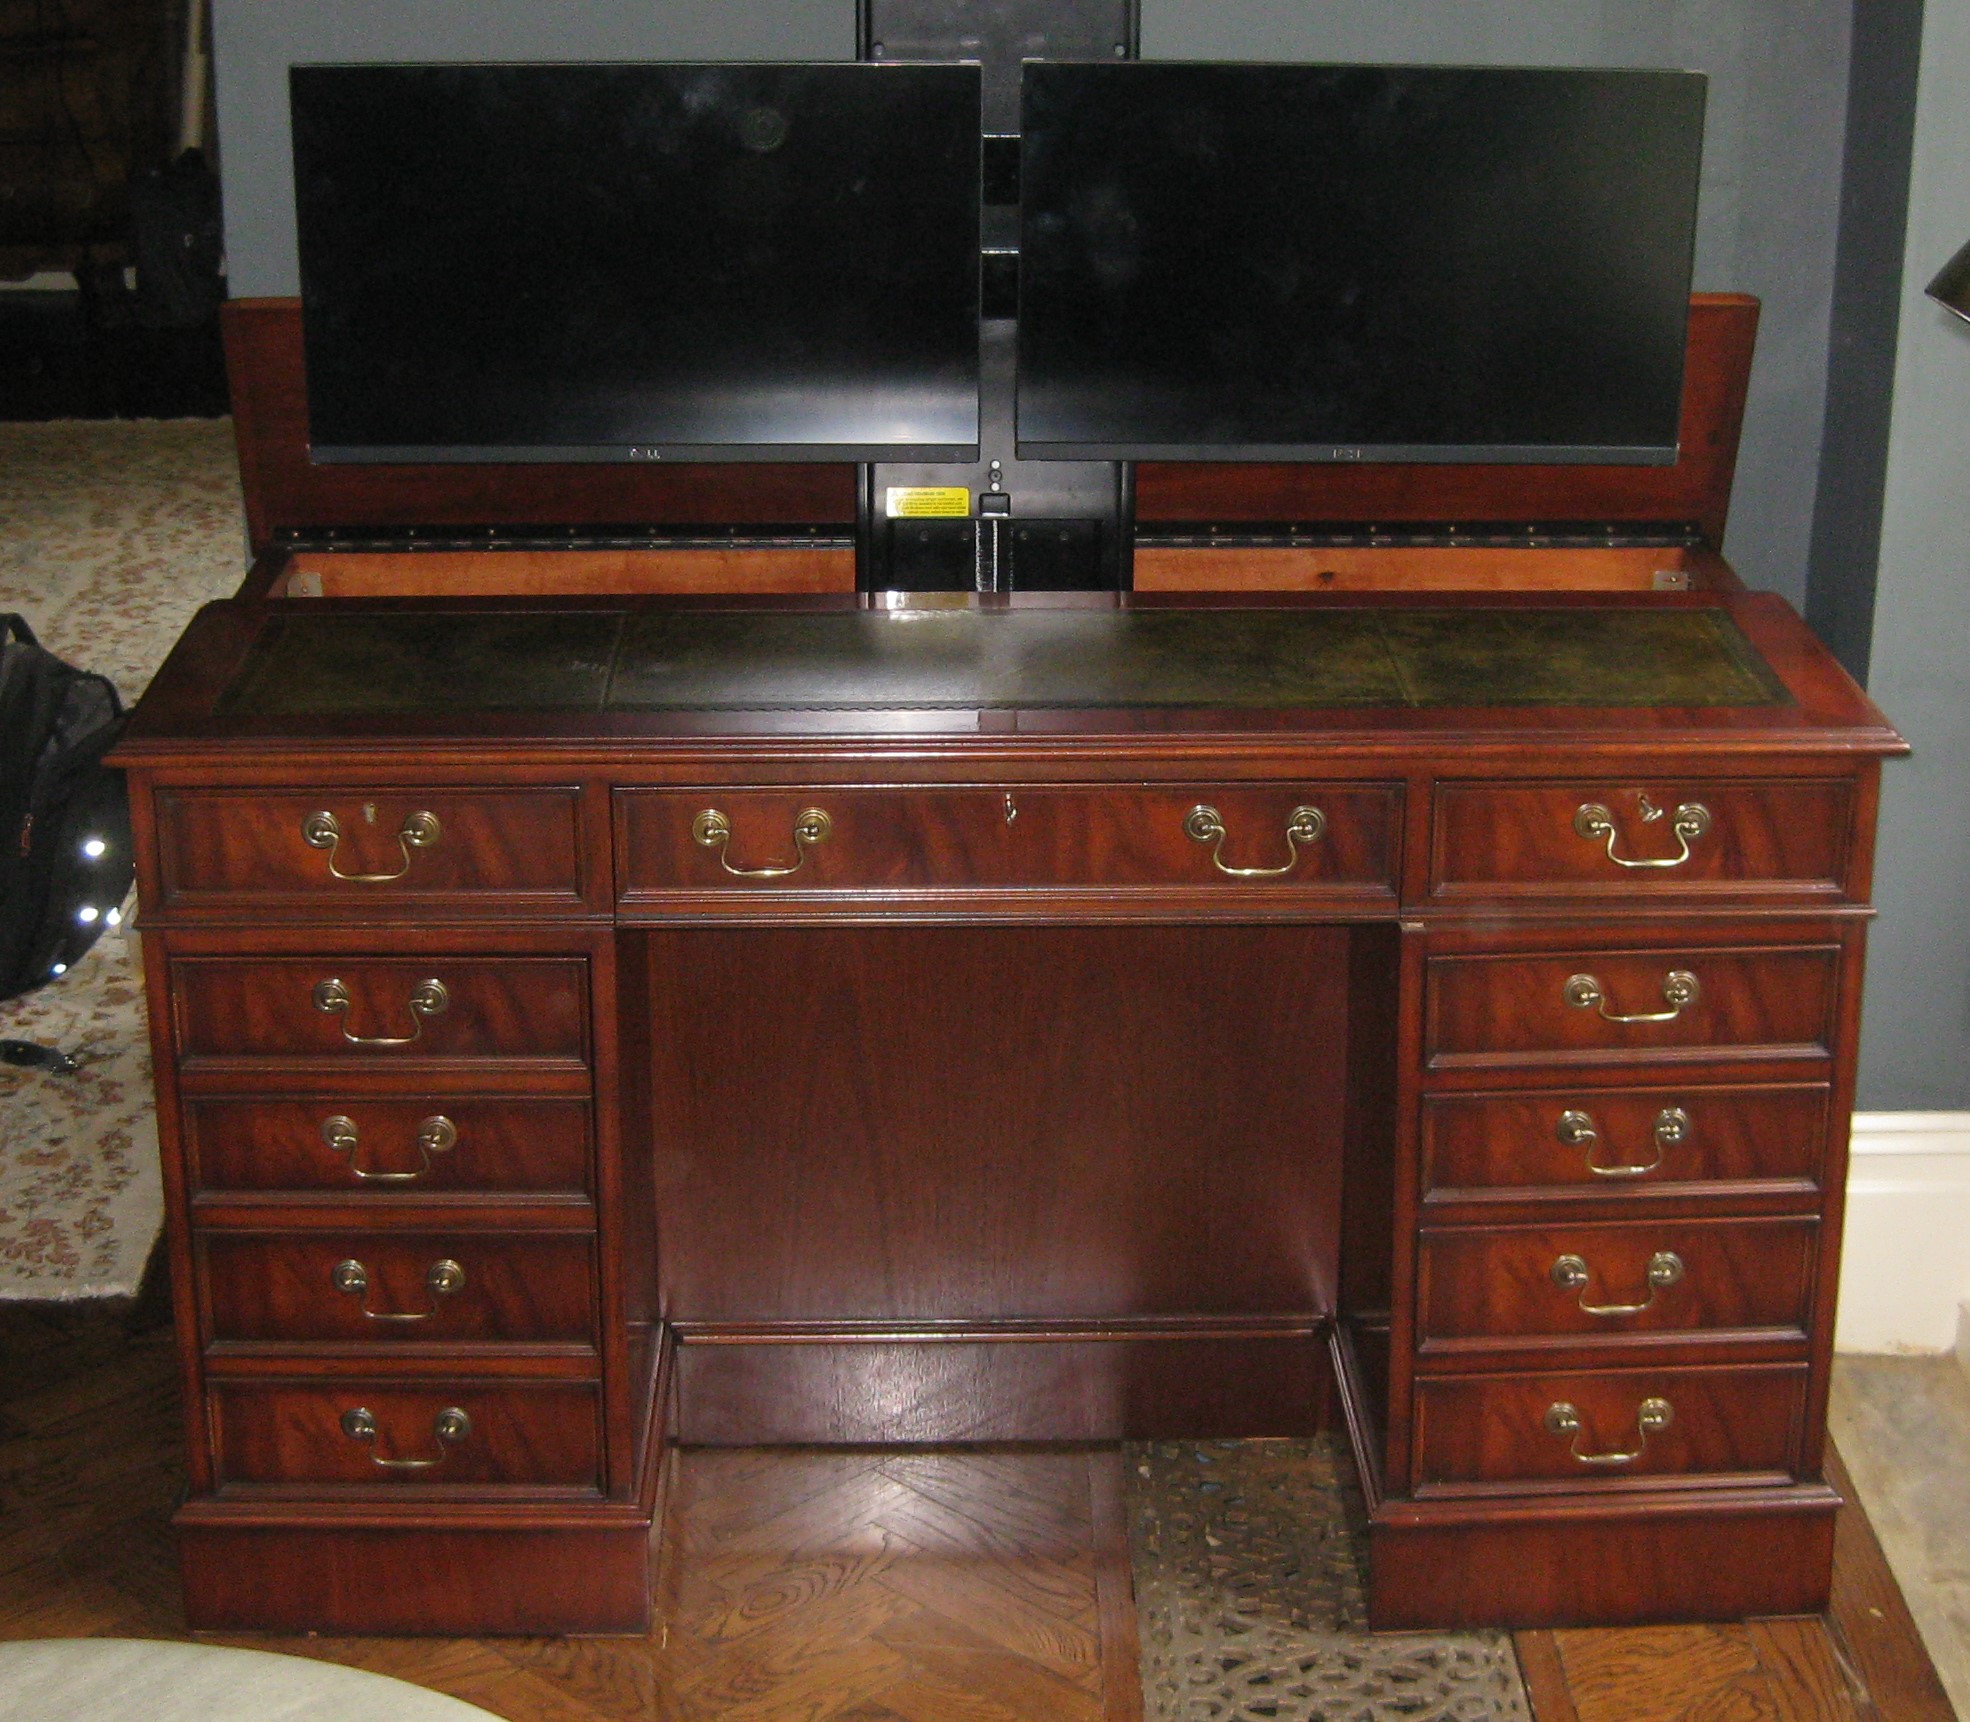 Reproduction Computer Desk With Automatic Lift Mechanism Dorking